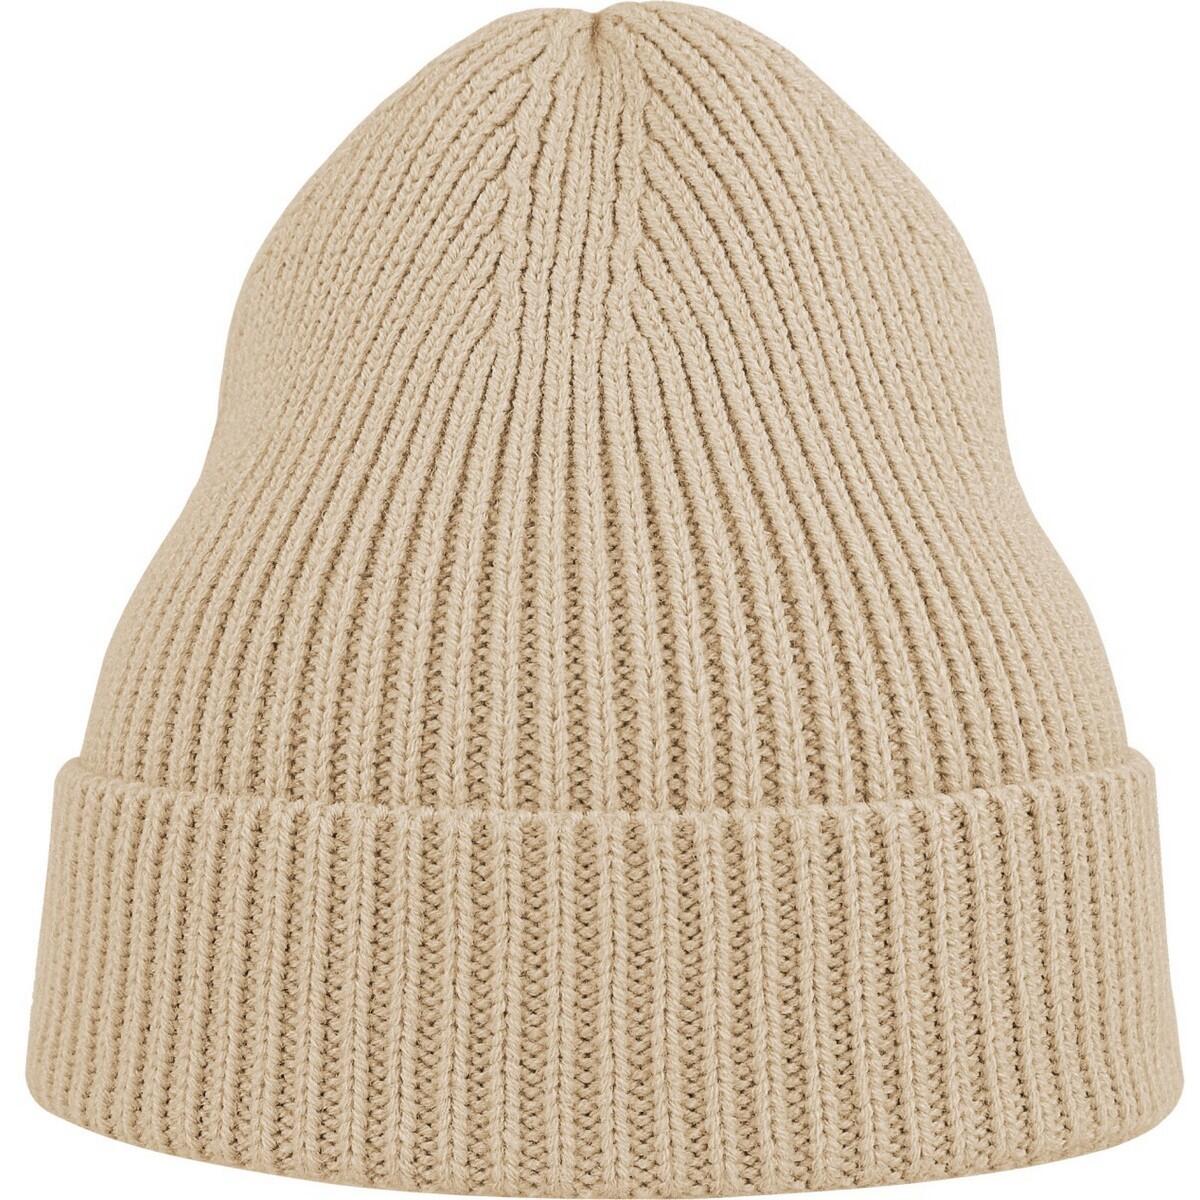 ATLANTIS Unisex Adult Andy Recycled Polyester Beanie (Beige)